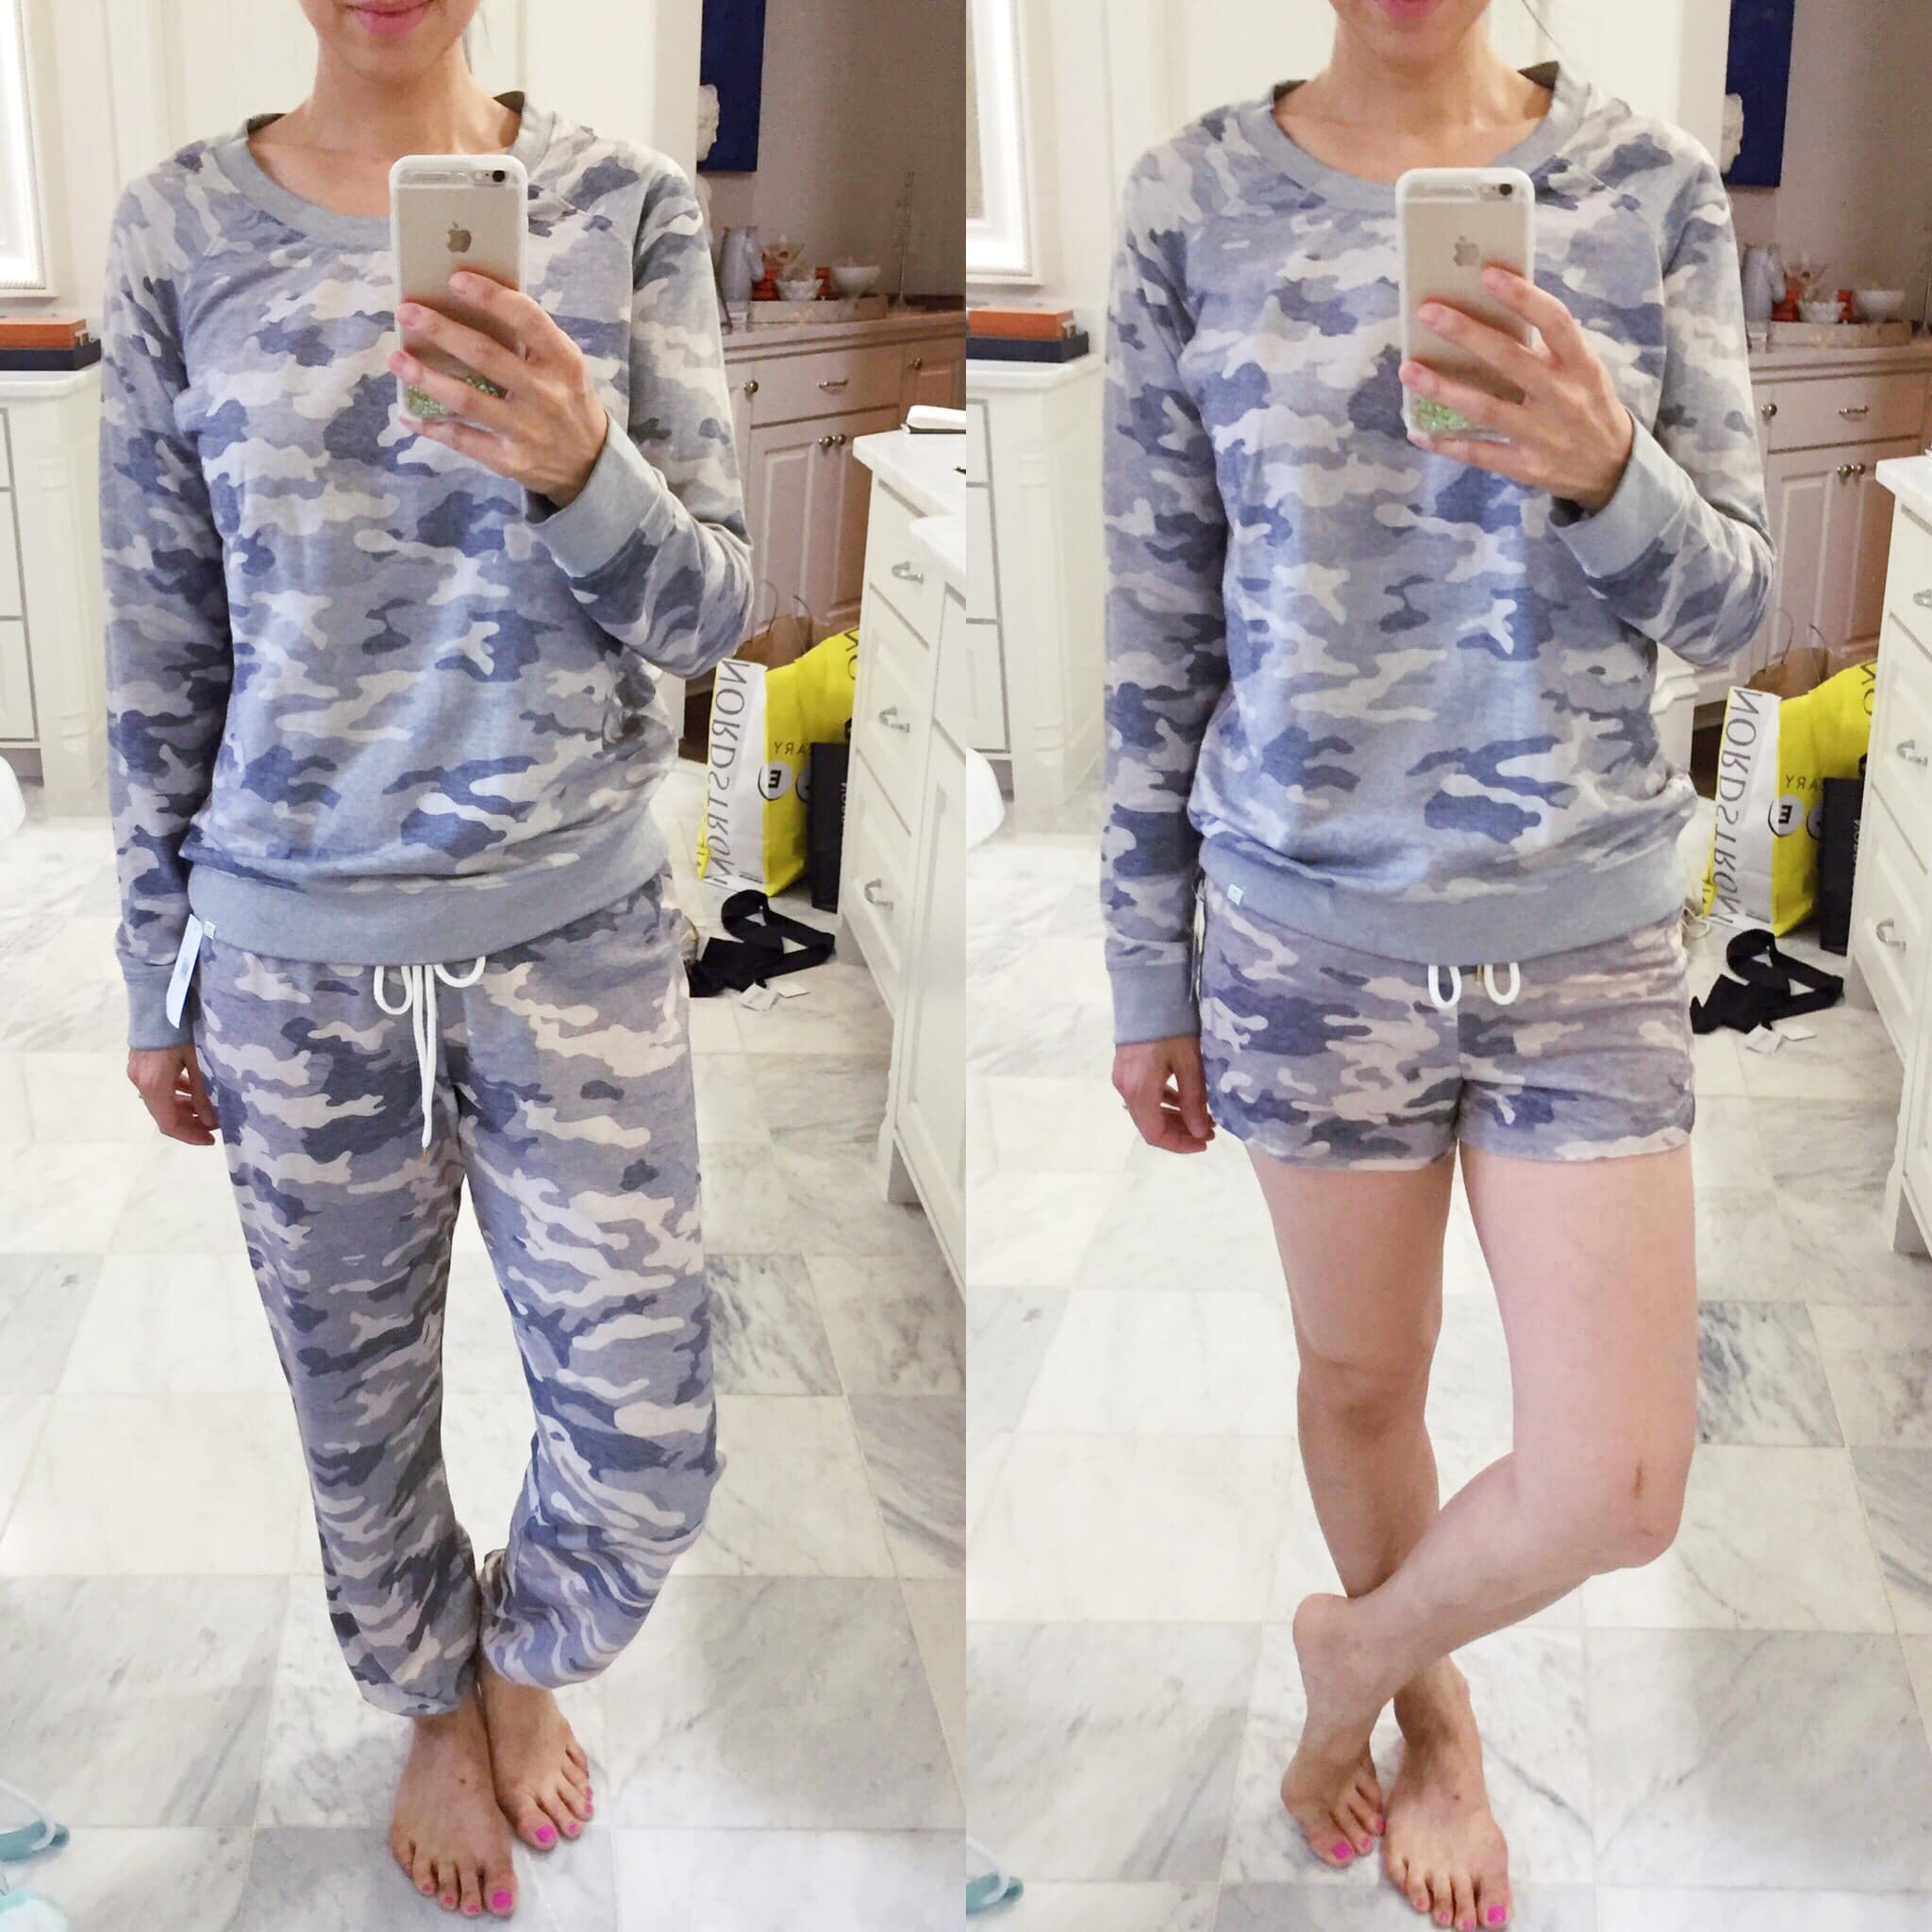 dressing room outfits nordstrom anniversary sale picks, camo pjs